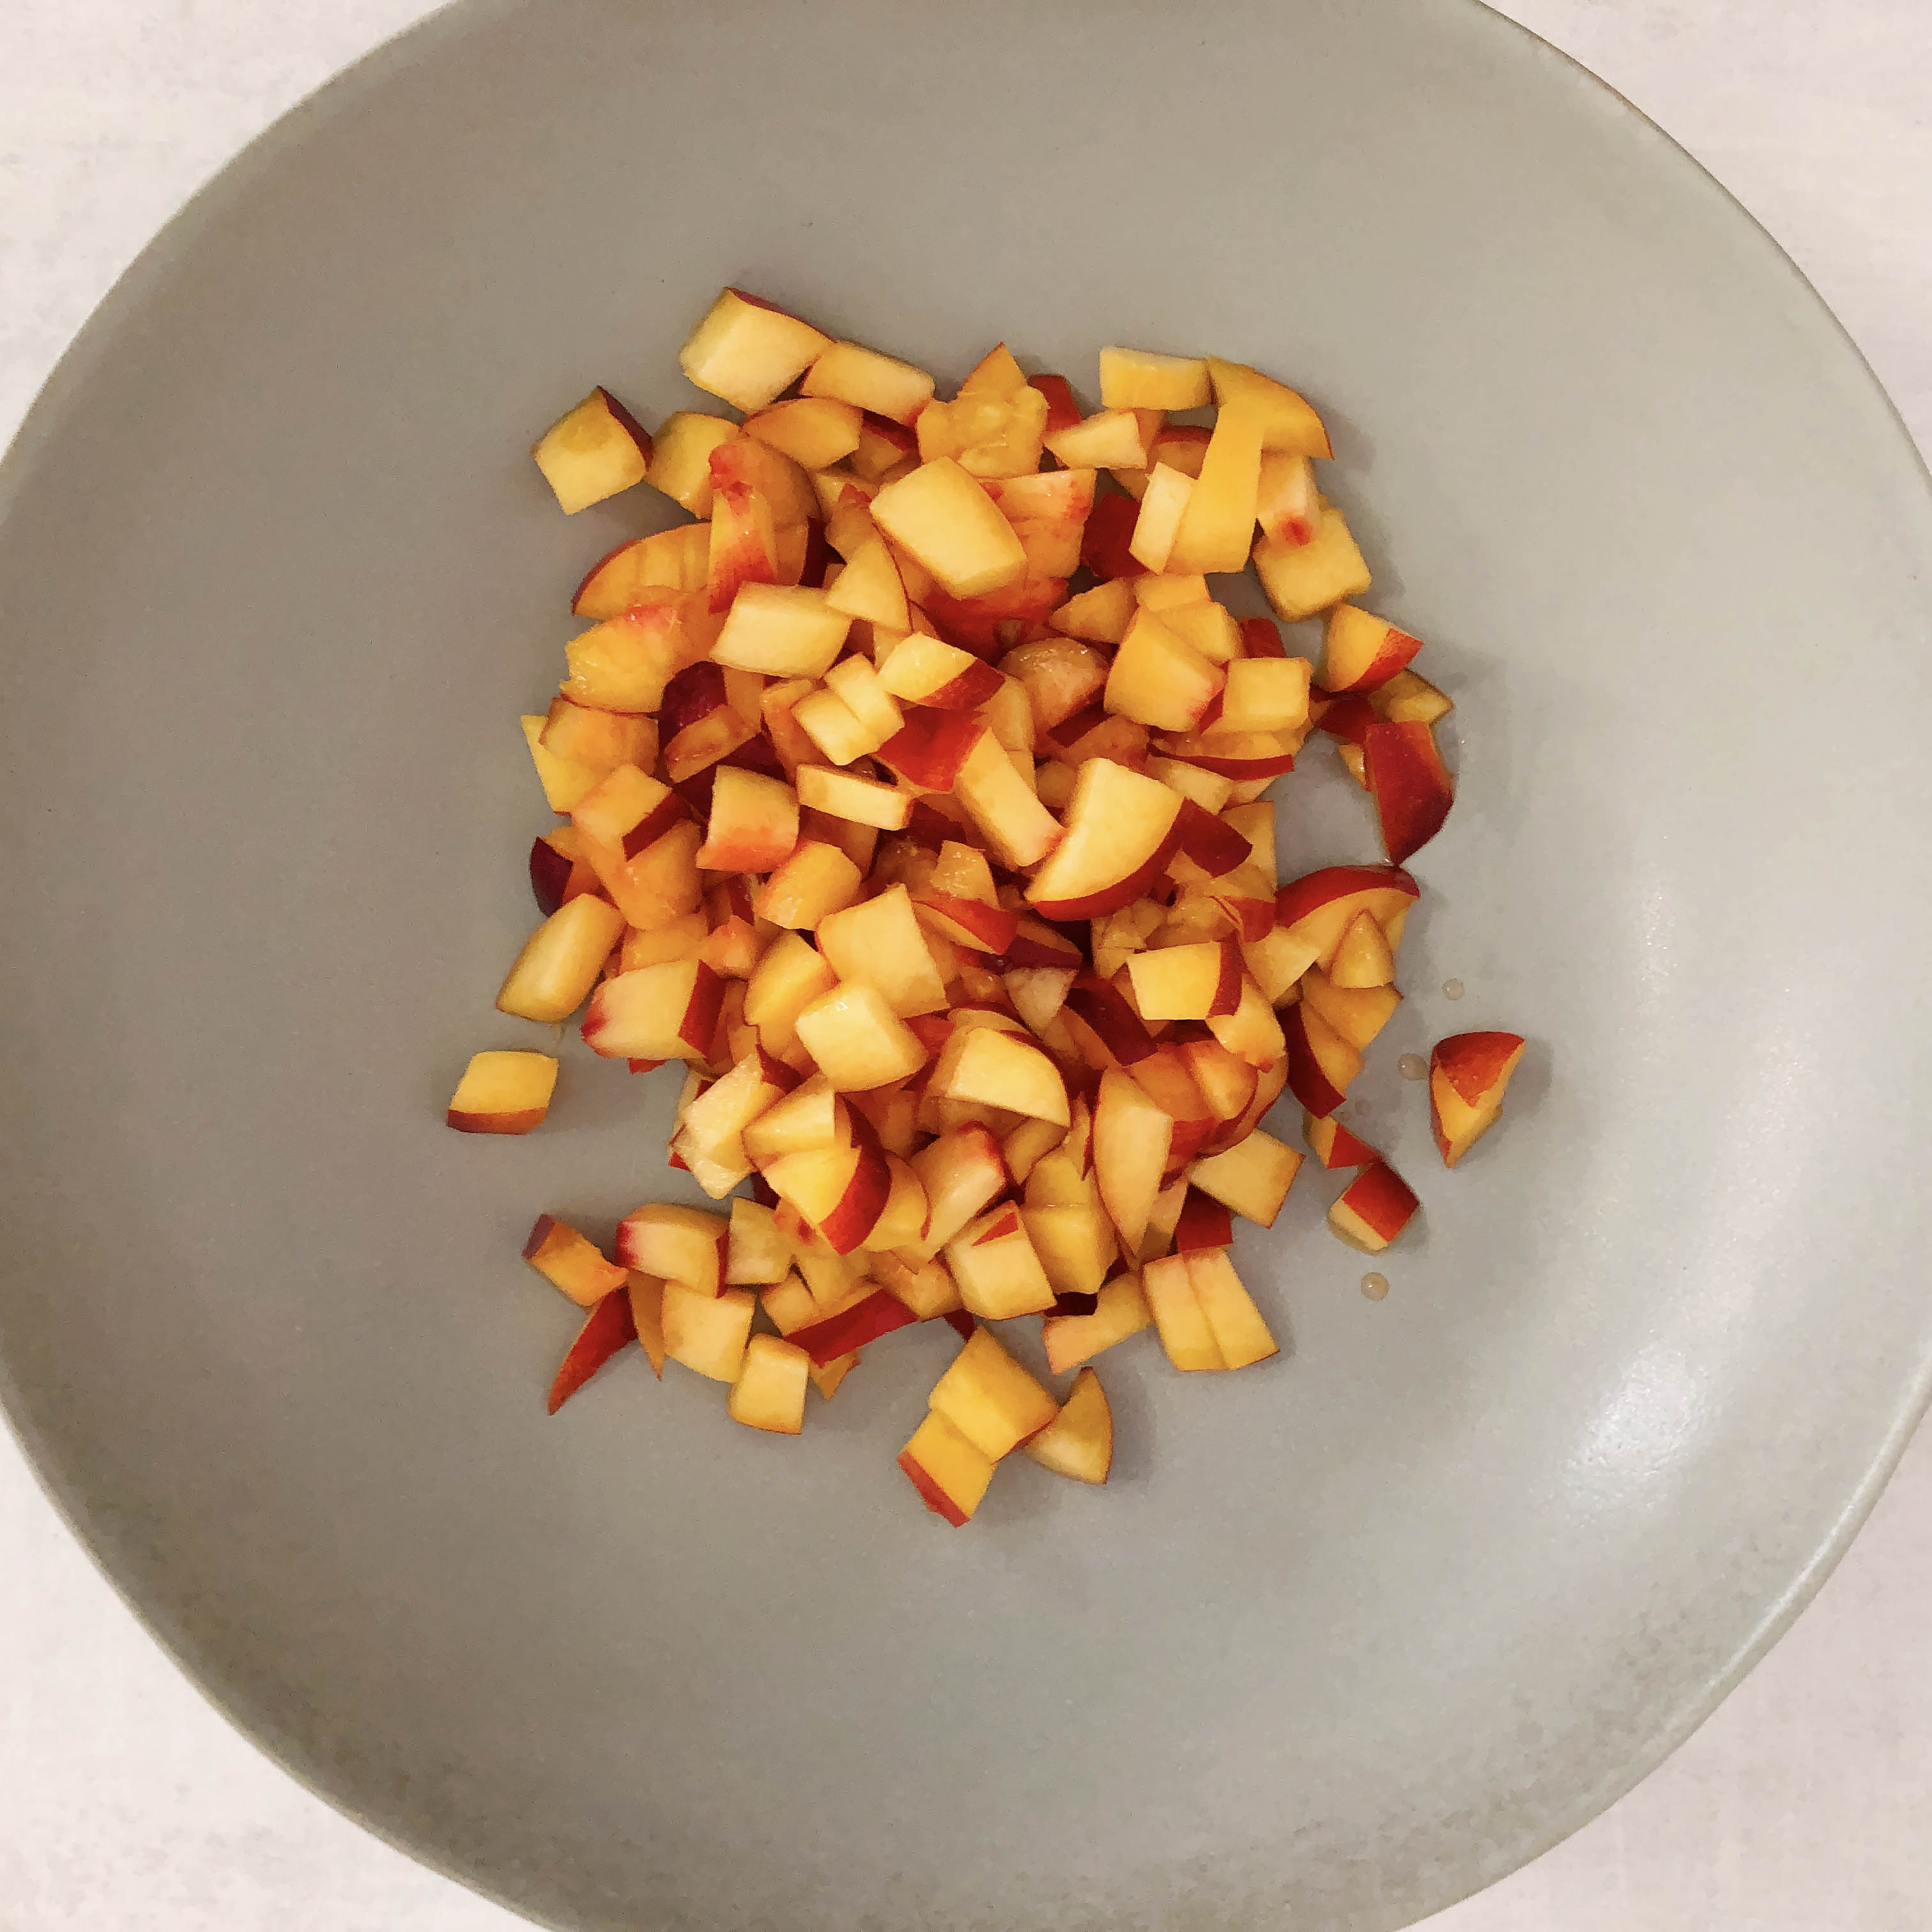 Top-down view of diced nectarines in a serving bowl